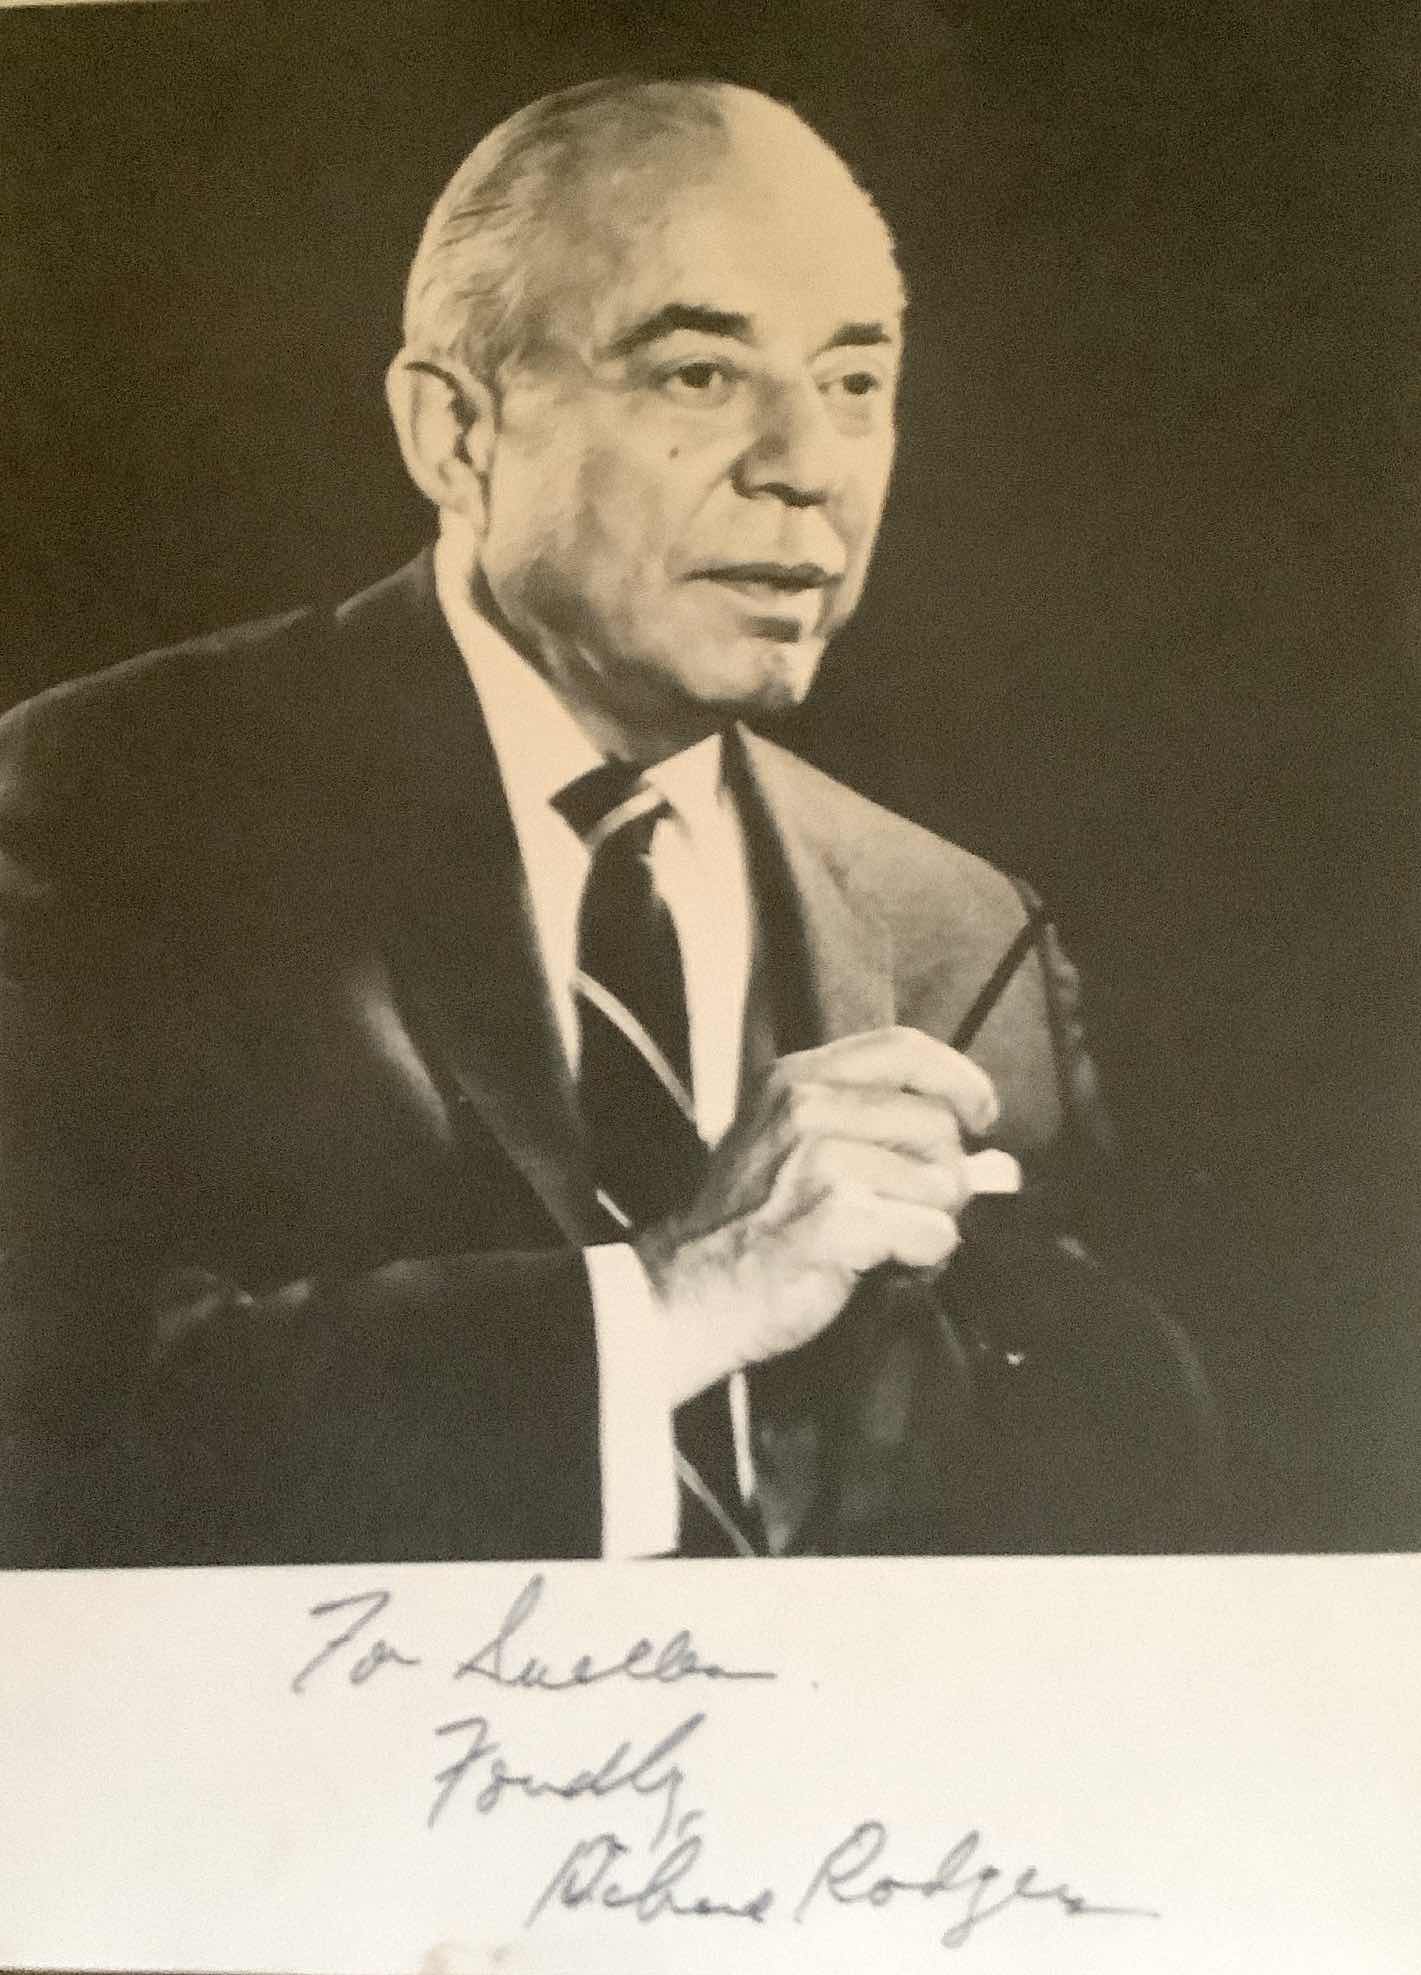 1_Autographed-photo-to-Suellen-from-Richard-Rodgers-Dec-4-2020-12-47-PM